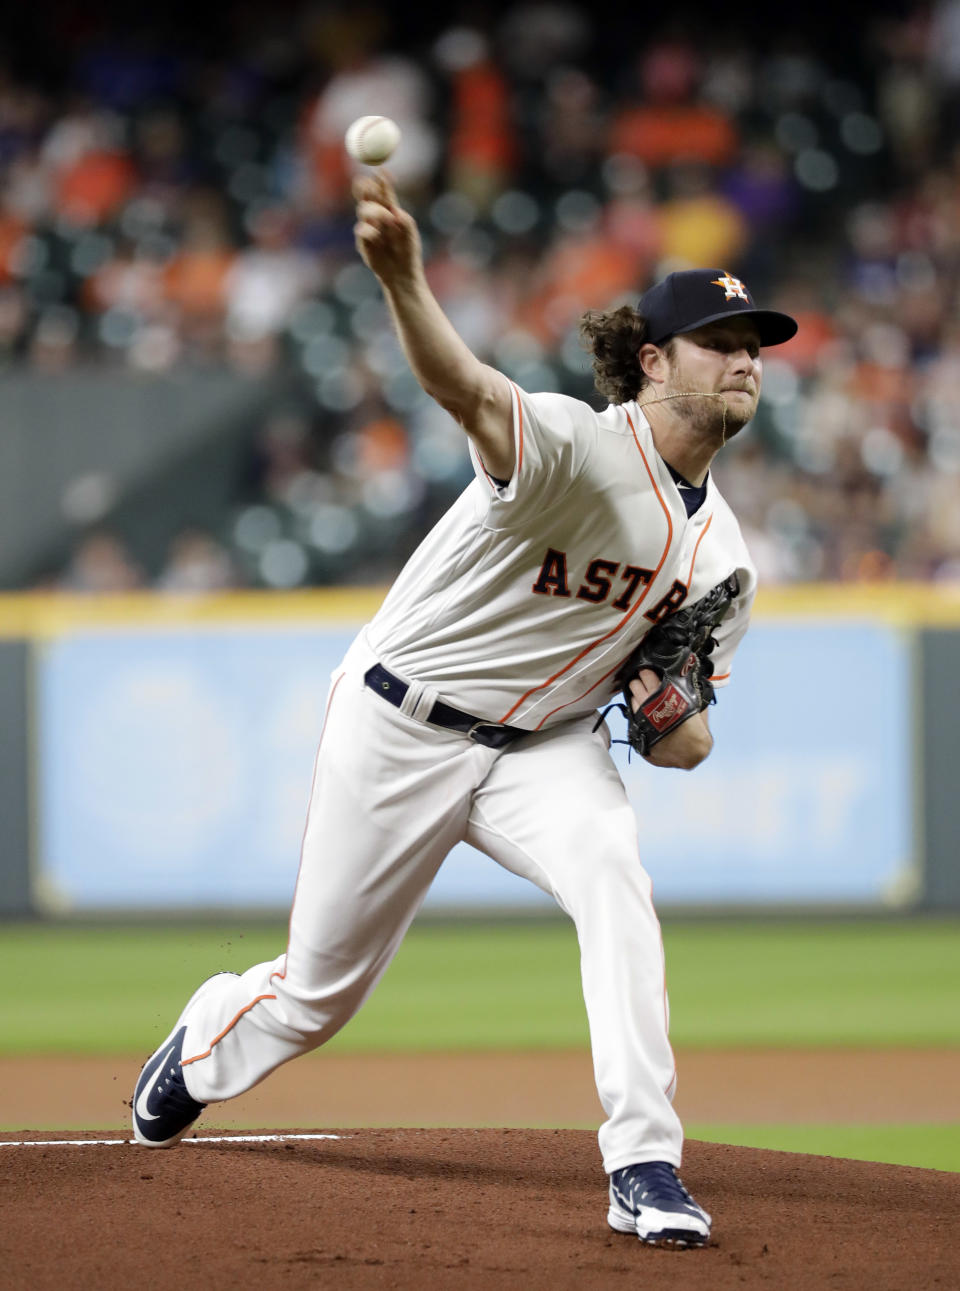 Houston Astros starting pitcher Gerrit Cole throws to a Colorado Rockies batter during the first inning of a baseball game Wednesday, Aug. 15, 2018, in Houston. (AP Photo/David J. Phillip)